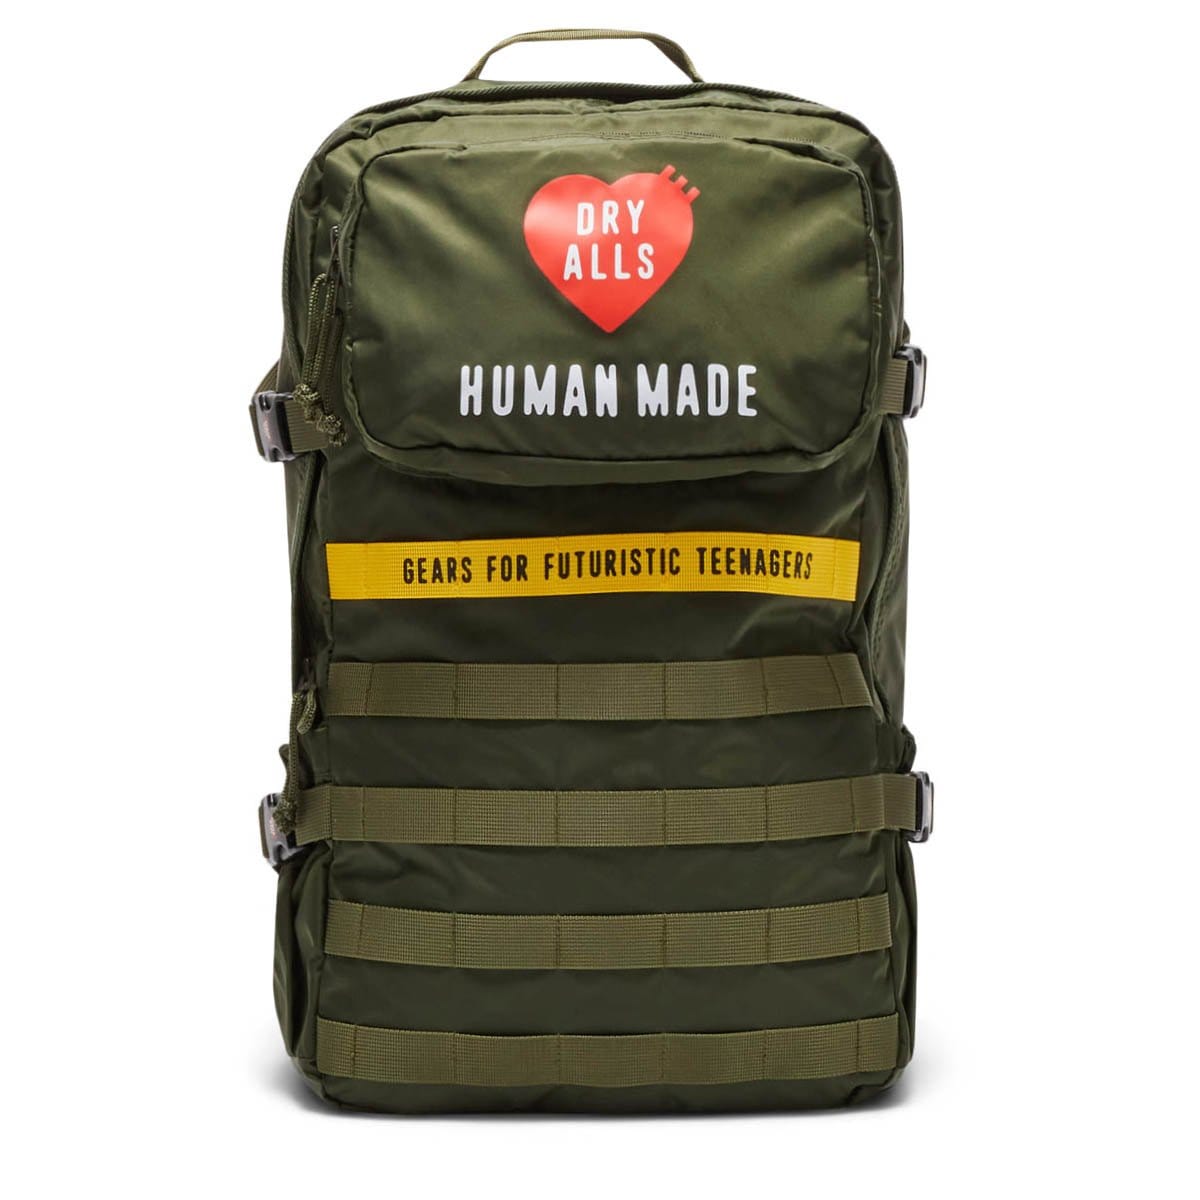 HUMAN MADE MILITARY RUCKSACK バッグ バックパック